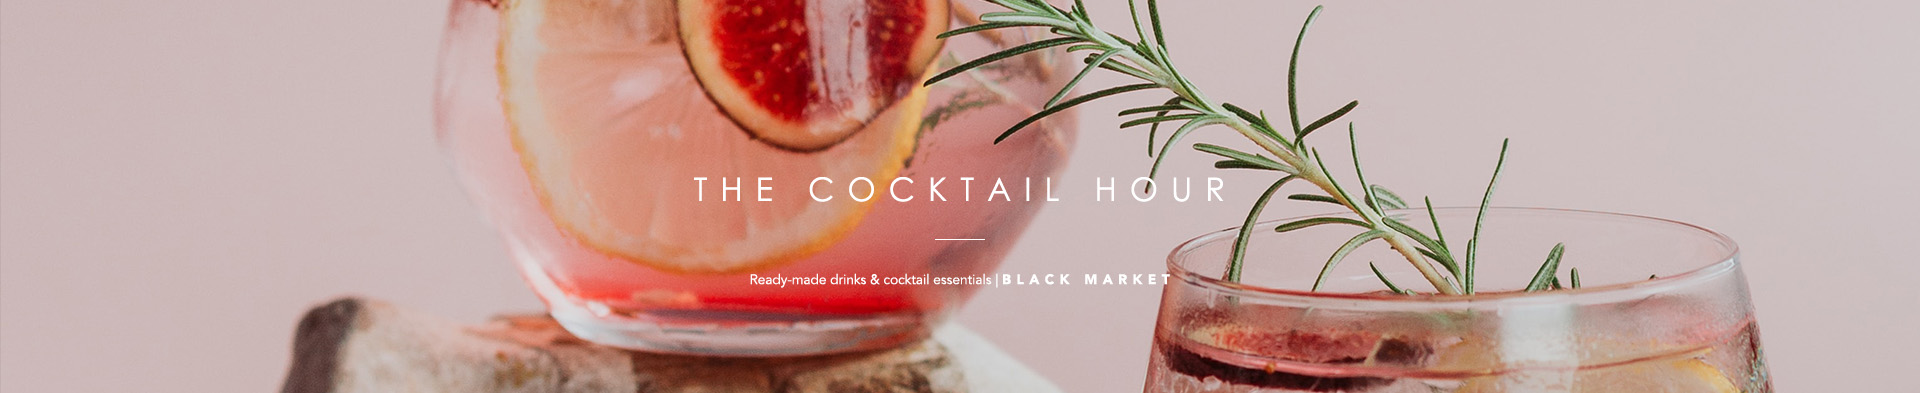 The Cocktail Hour Banner